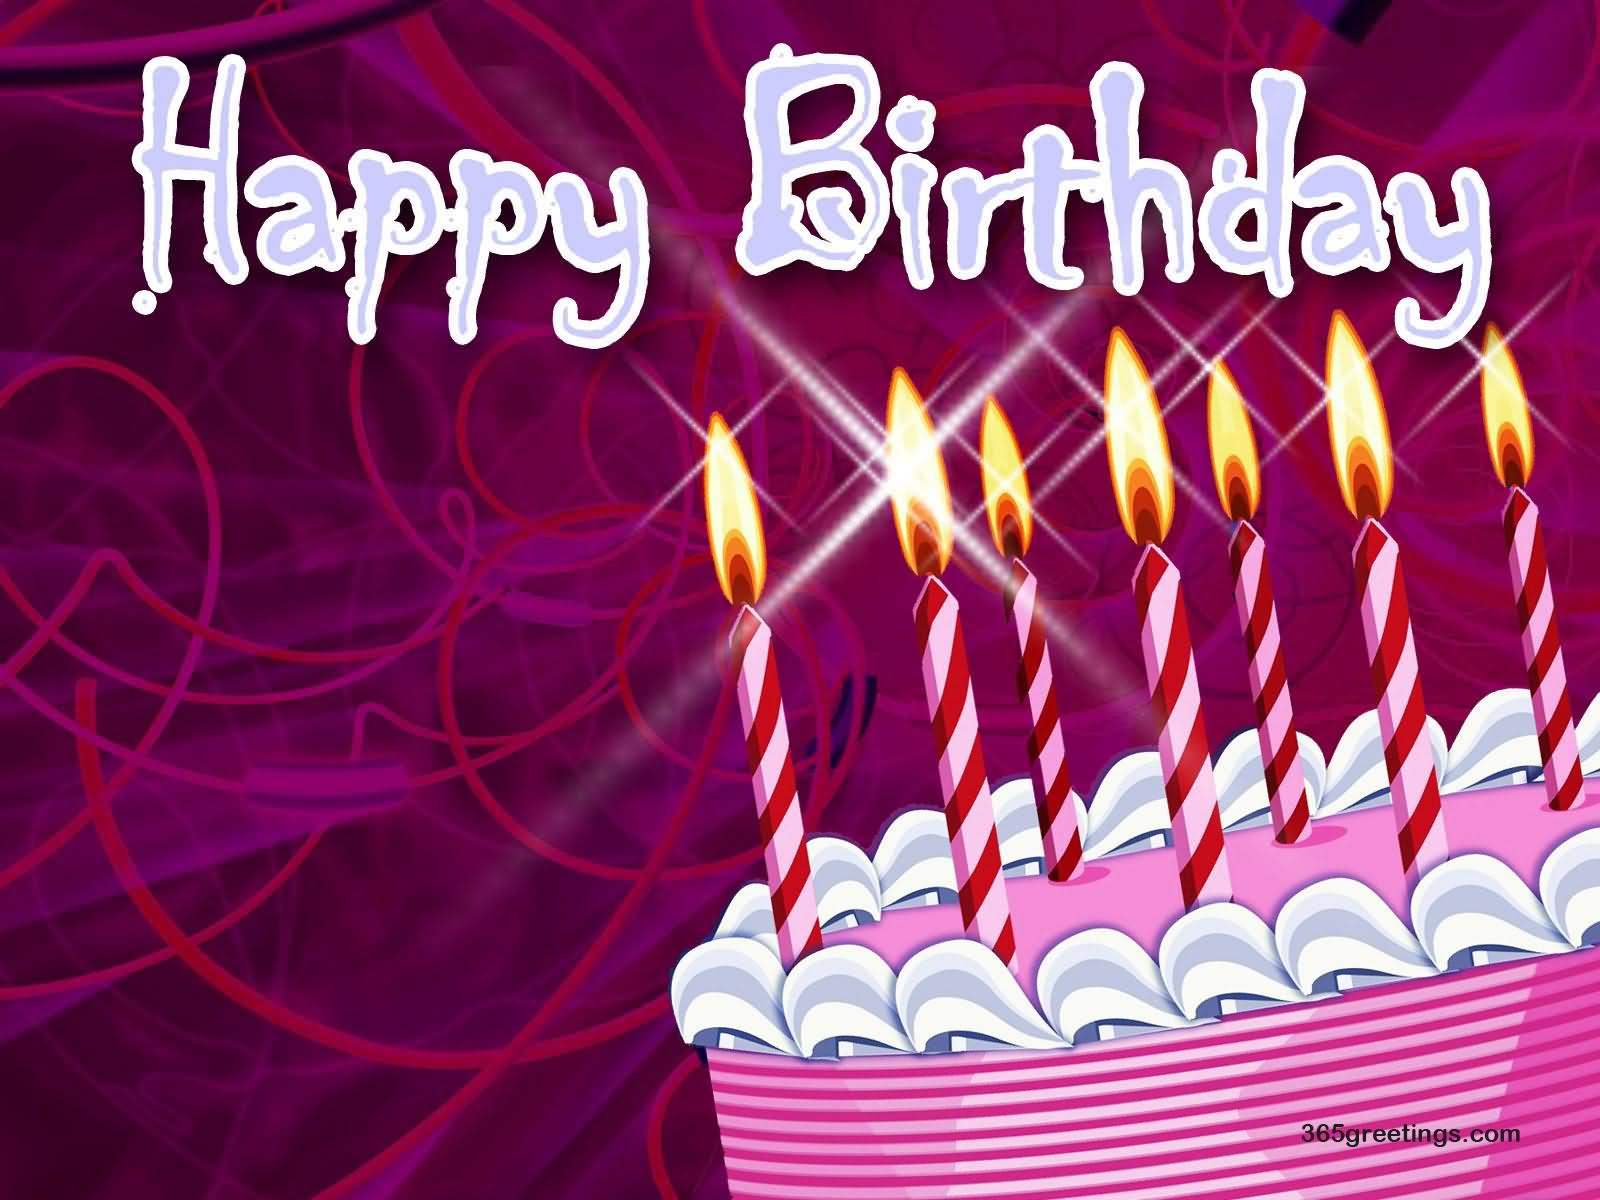 Free Download Happy Birthday Full Hd Wallpaper Graphic 1600x1200 For